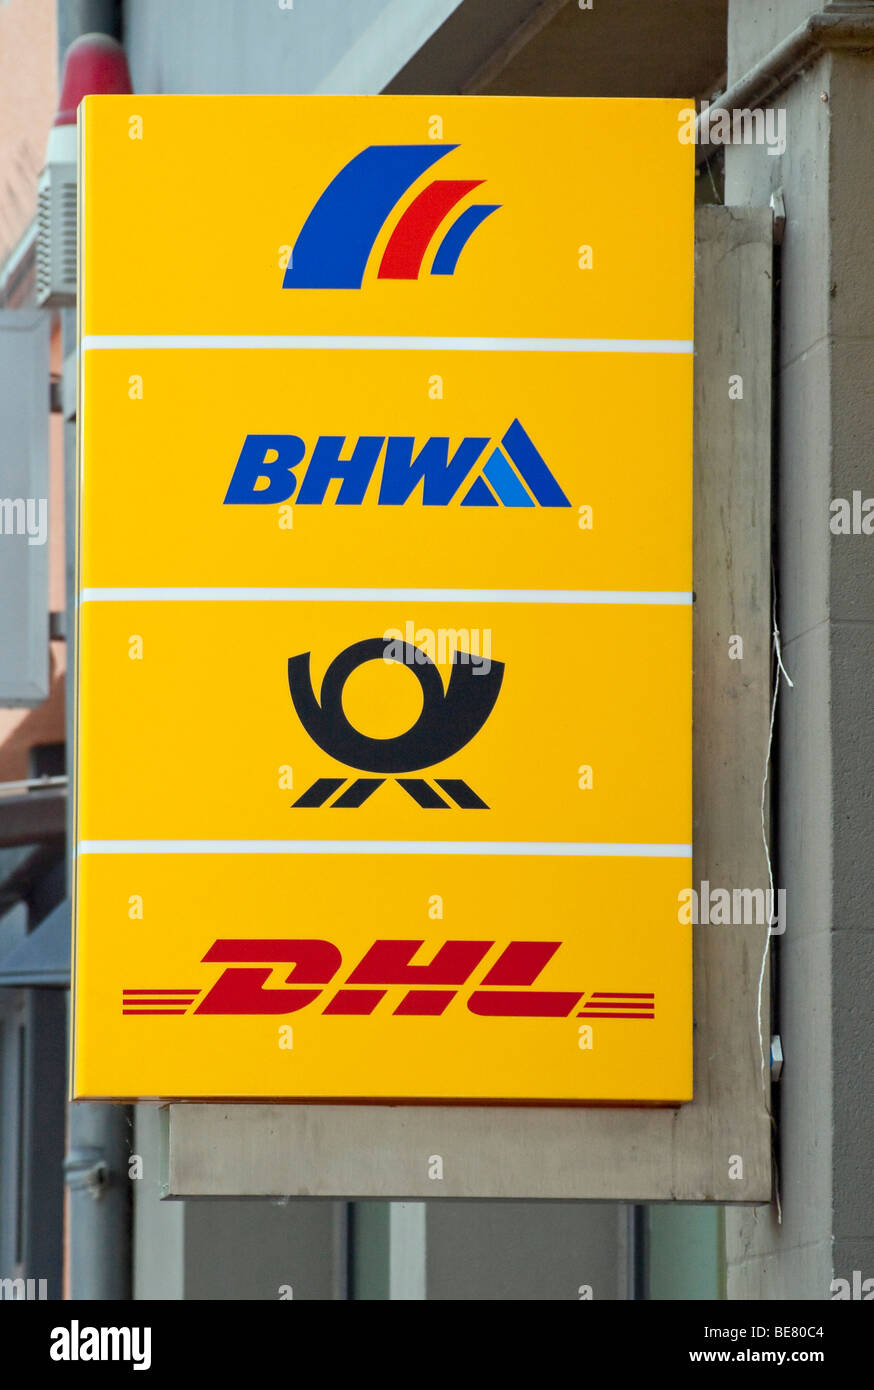 Logos of Deutsche Post, DHL and the BHW on a sign Stock Photo